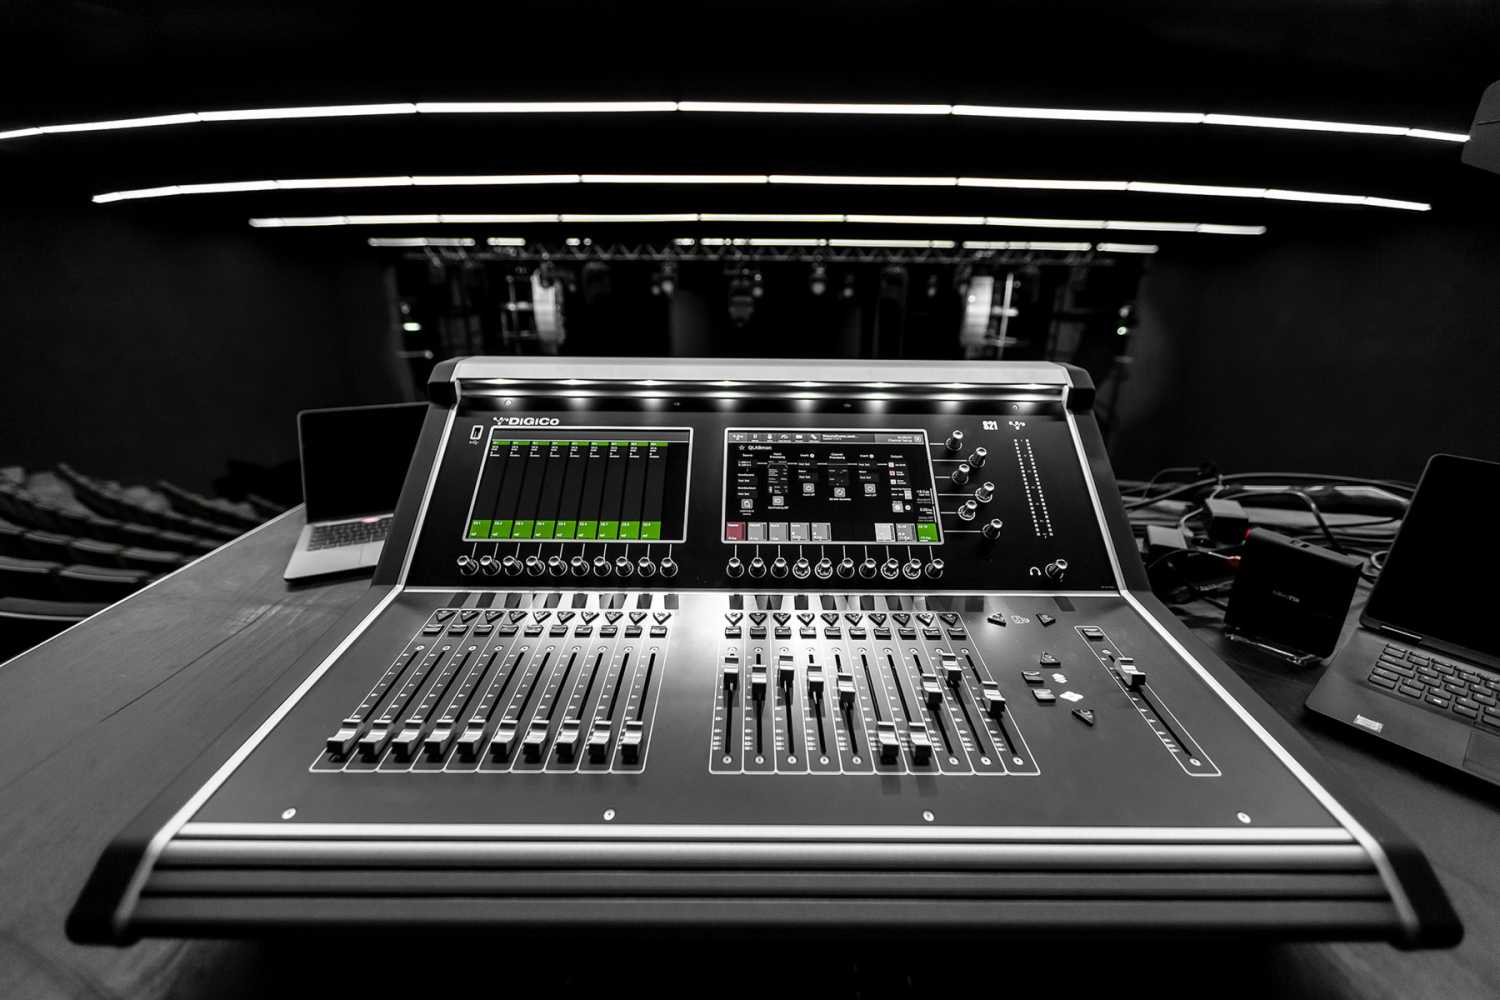 A DiGiCo S21 compact console was installed at front of house